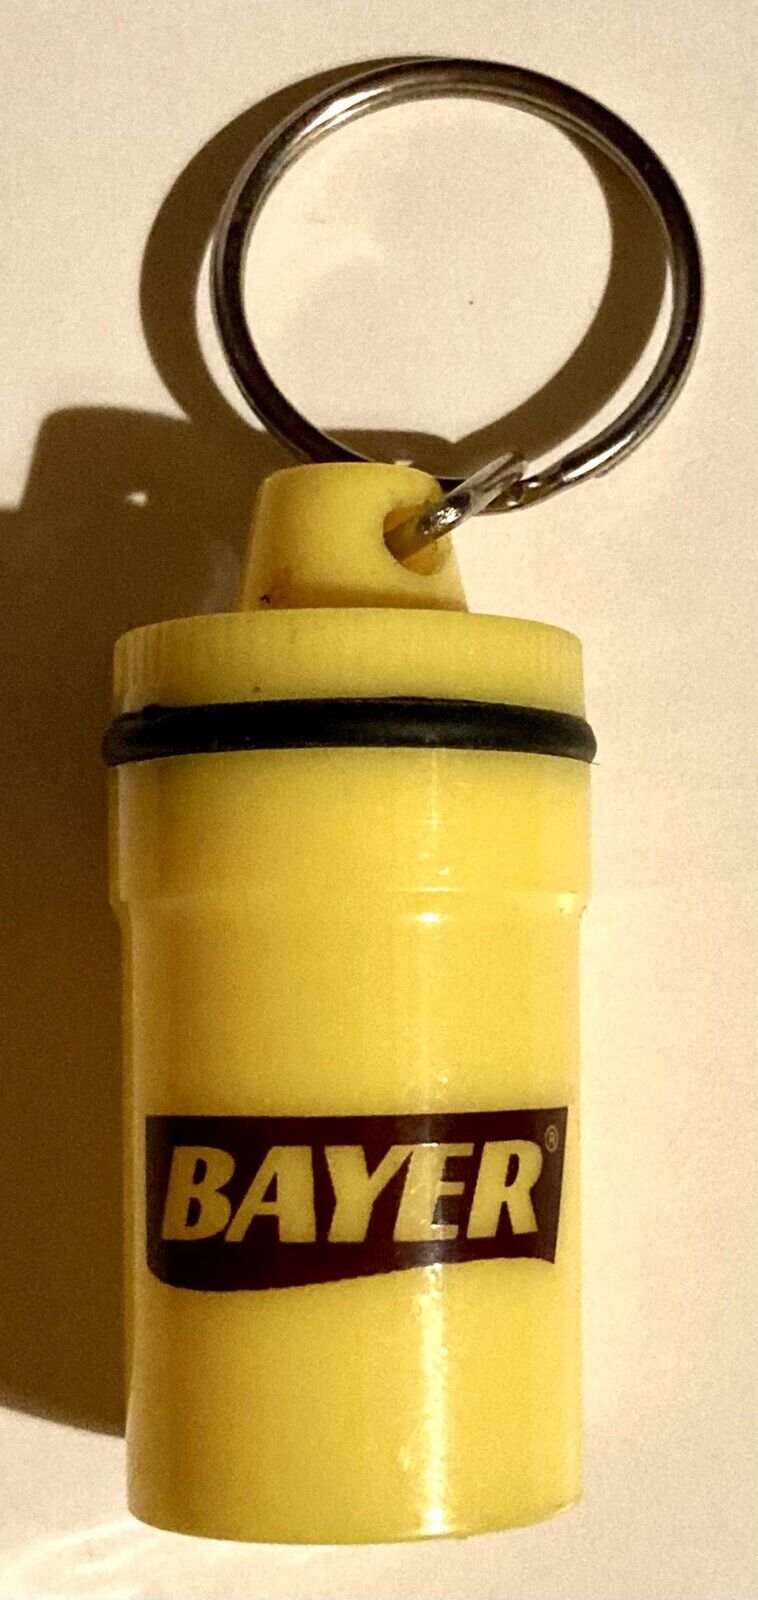 BAYER ASPIRIN PLASTIC KEYCHAIN WITH REMOVABLE TOP FOR STORAGE RARE VINTAGE 1990S